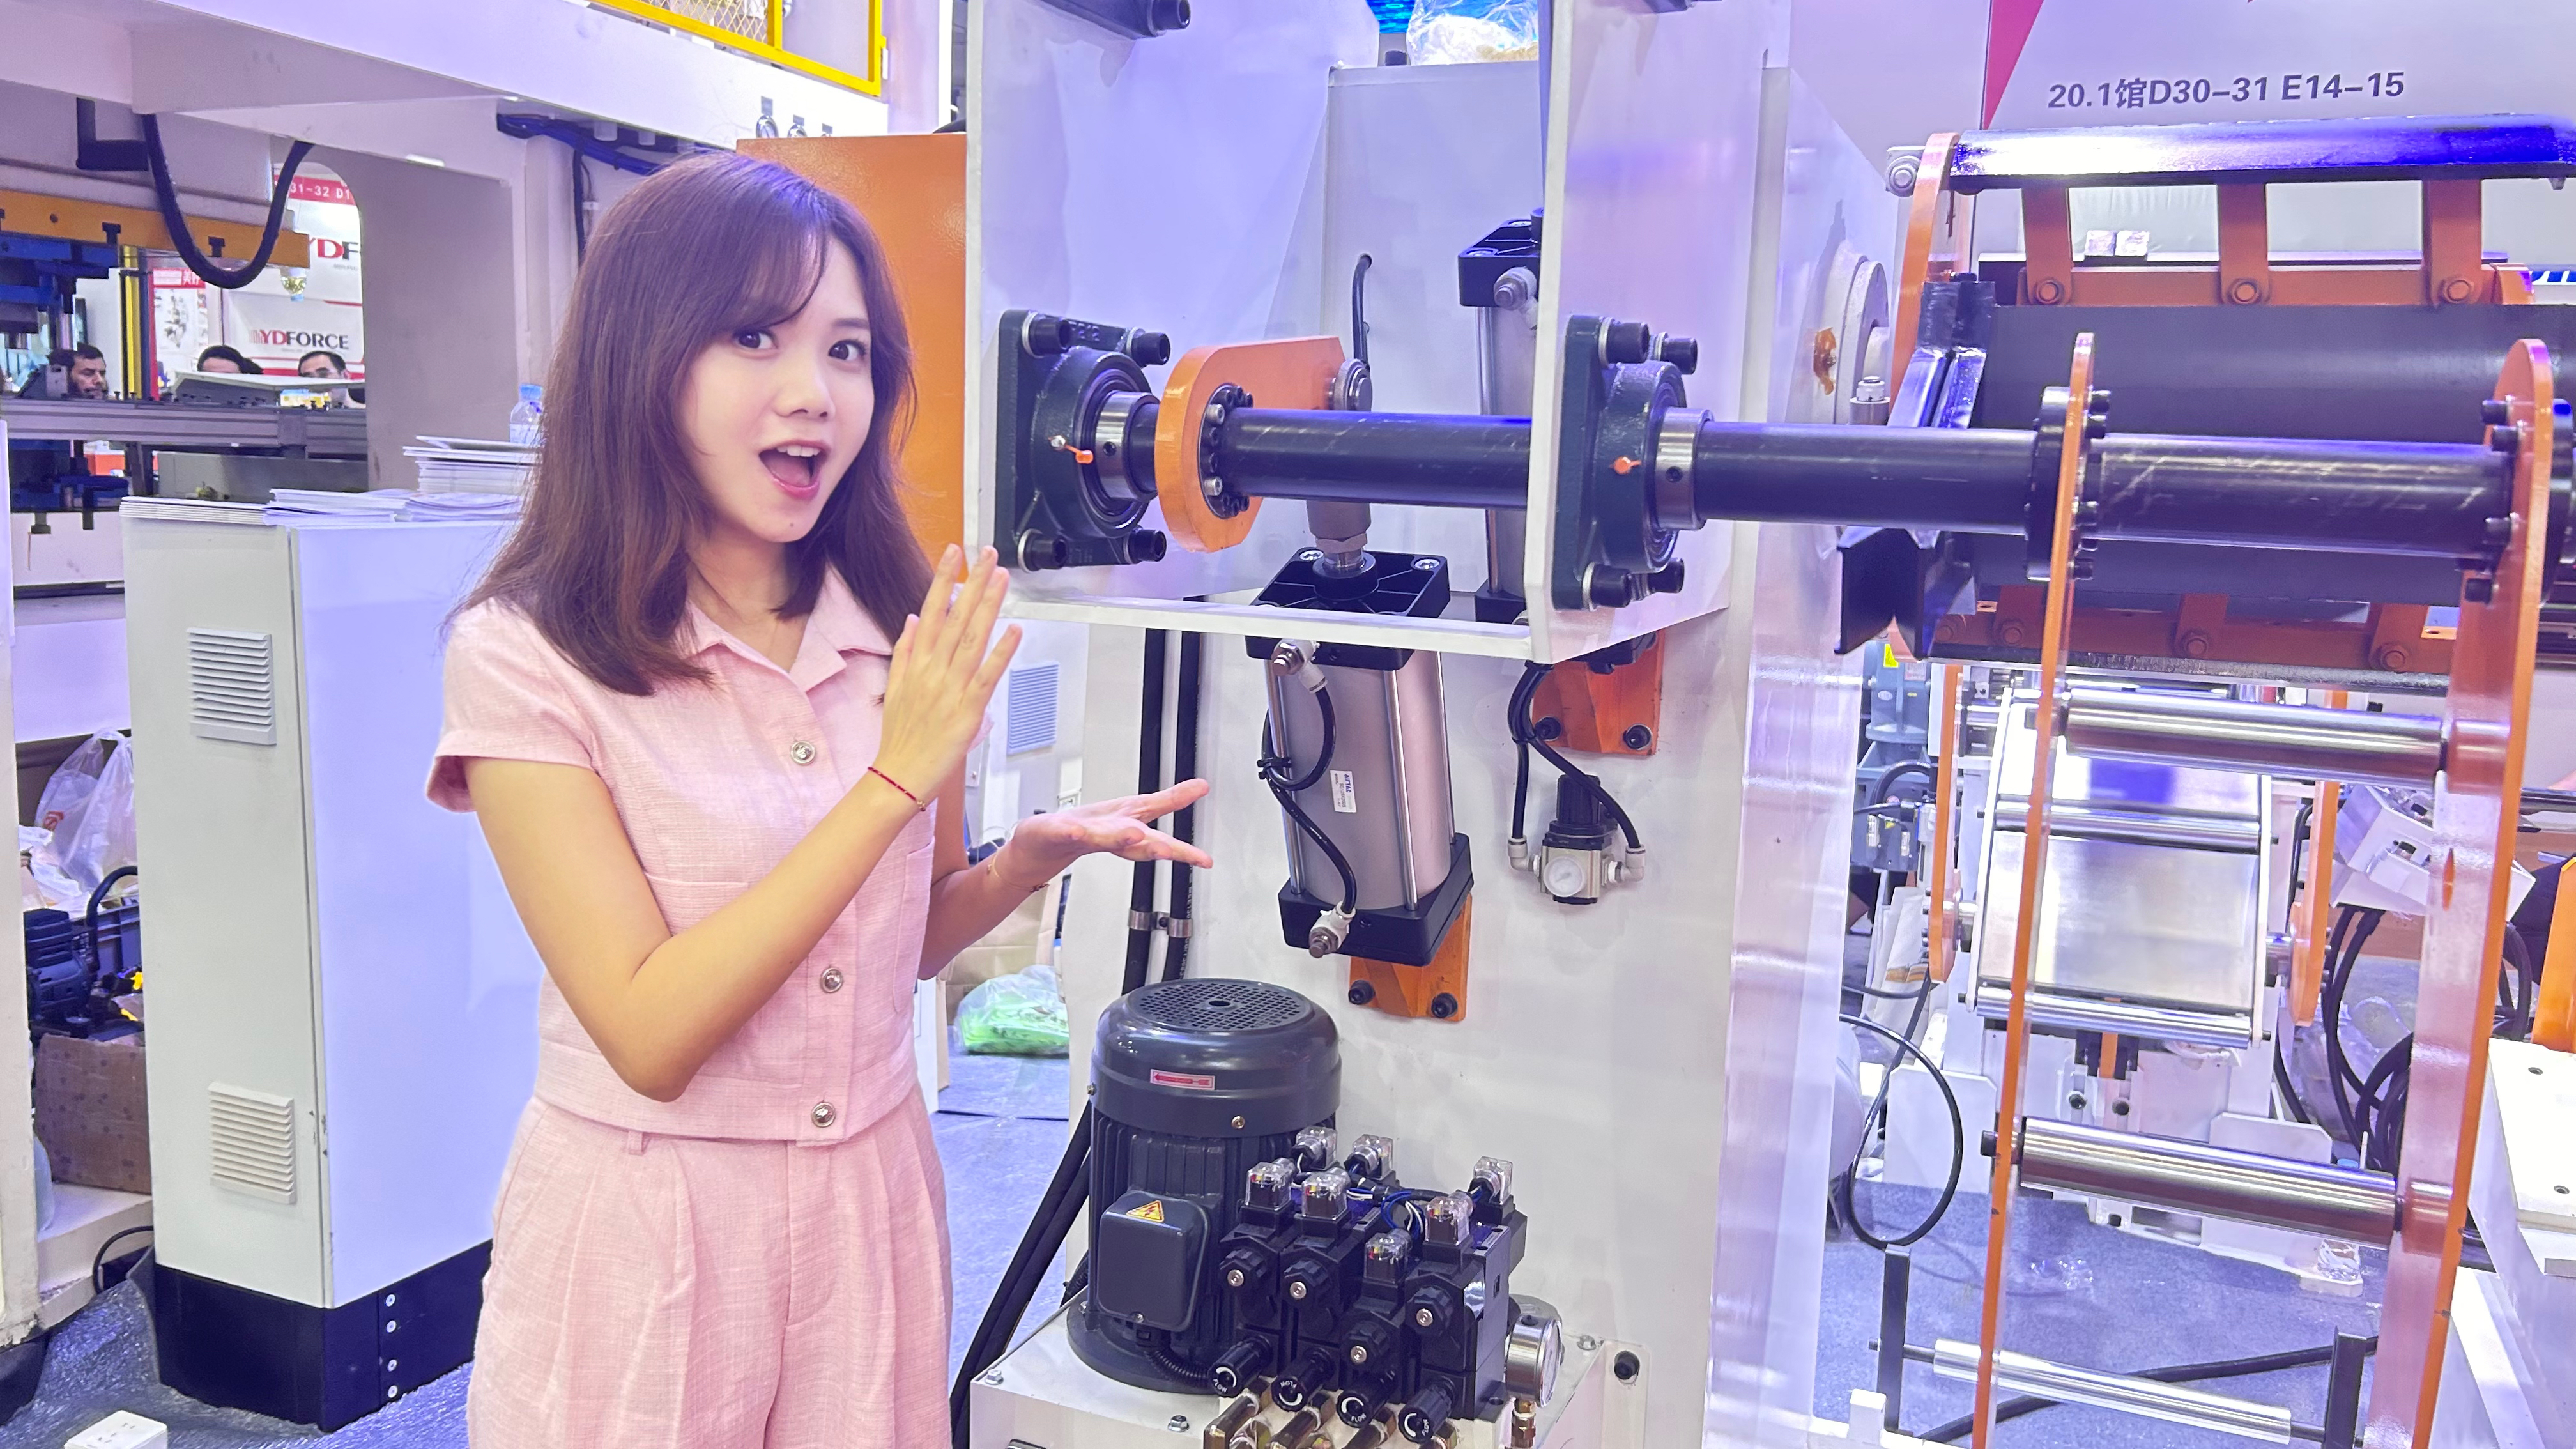 Live: Canton Fair highlights faster, smarter production 